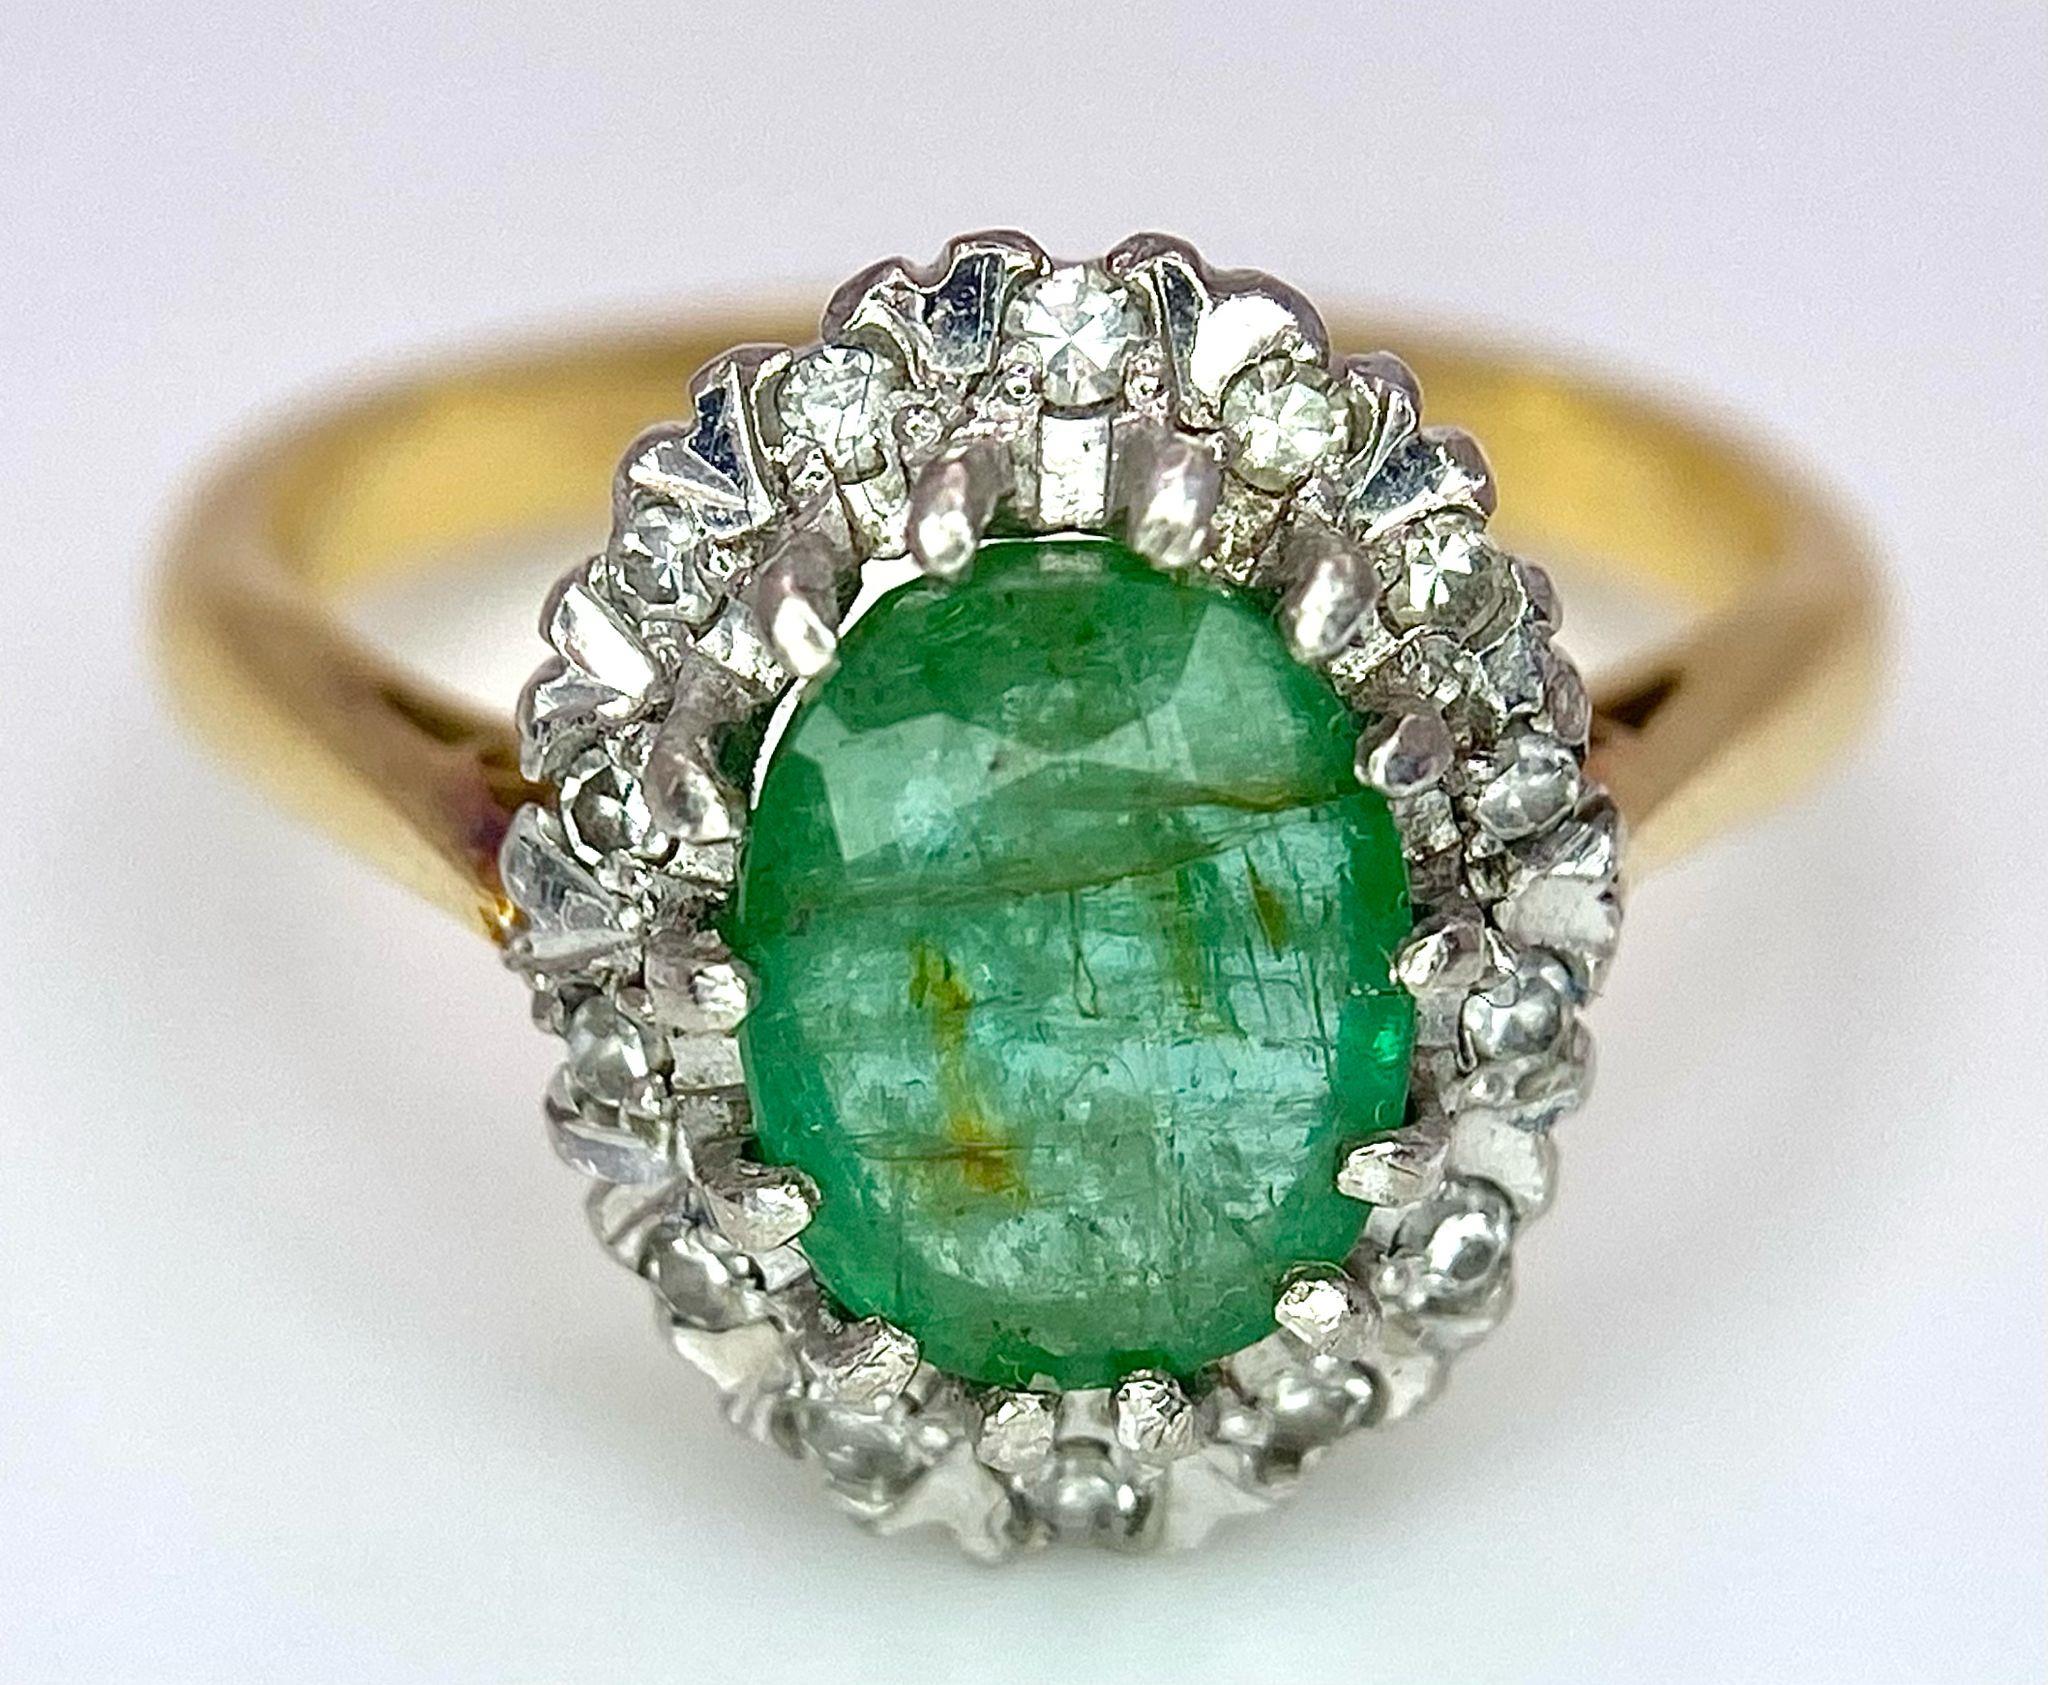 An 18K Yellow Gold, Emerald and Diamond Ring. Central 2ct emerald with a diamond surround. Size J. - Image 5 of 7